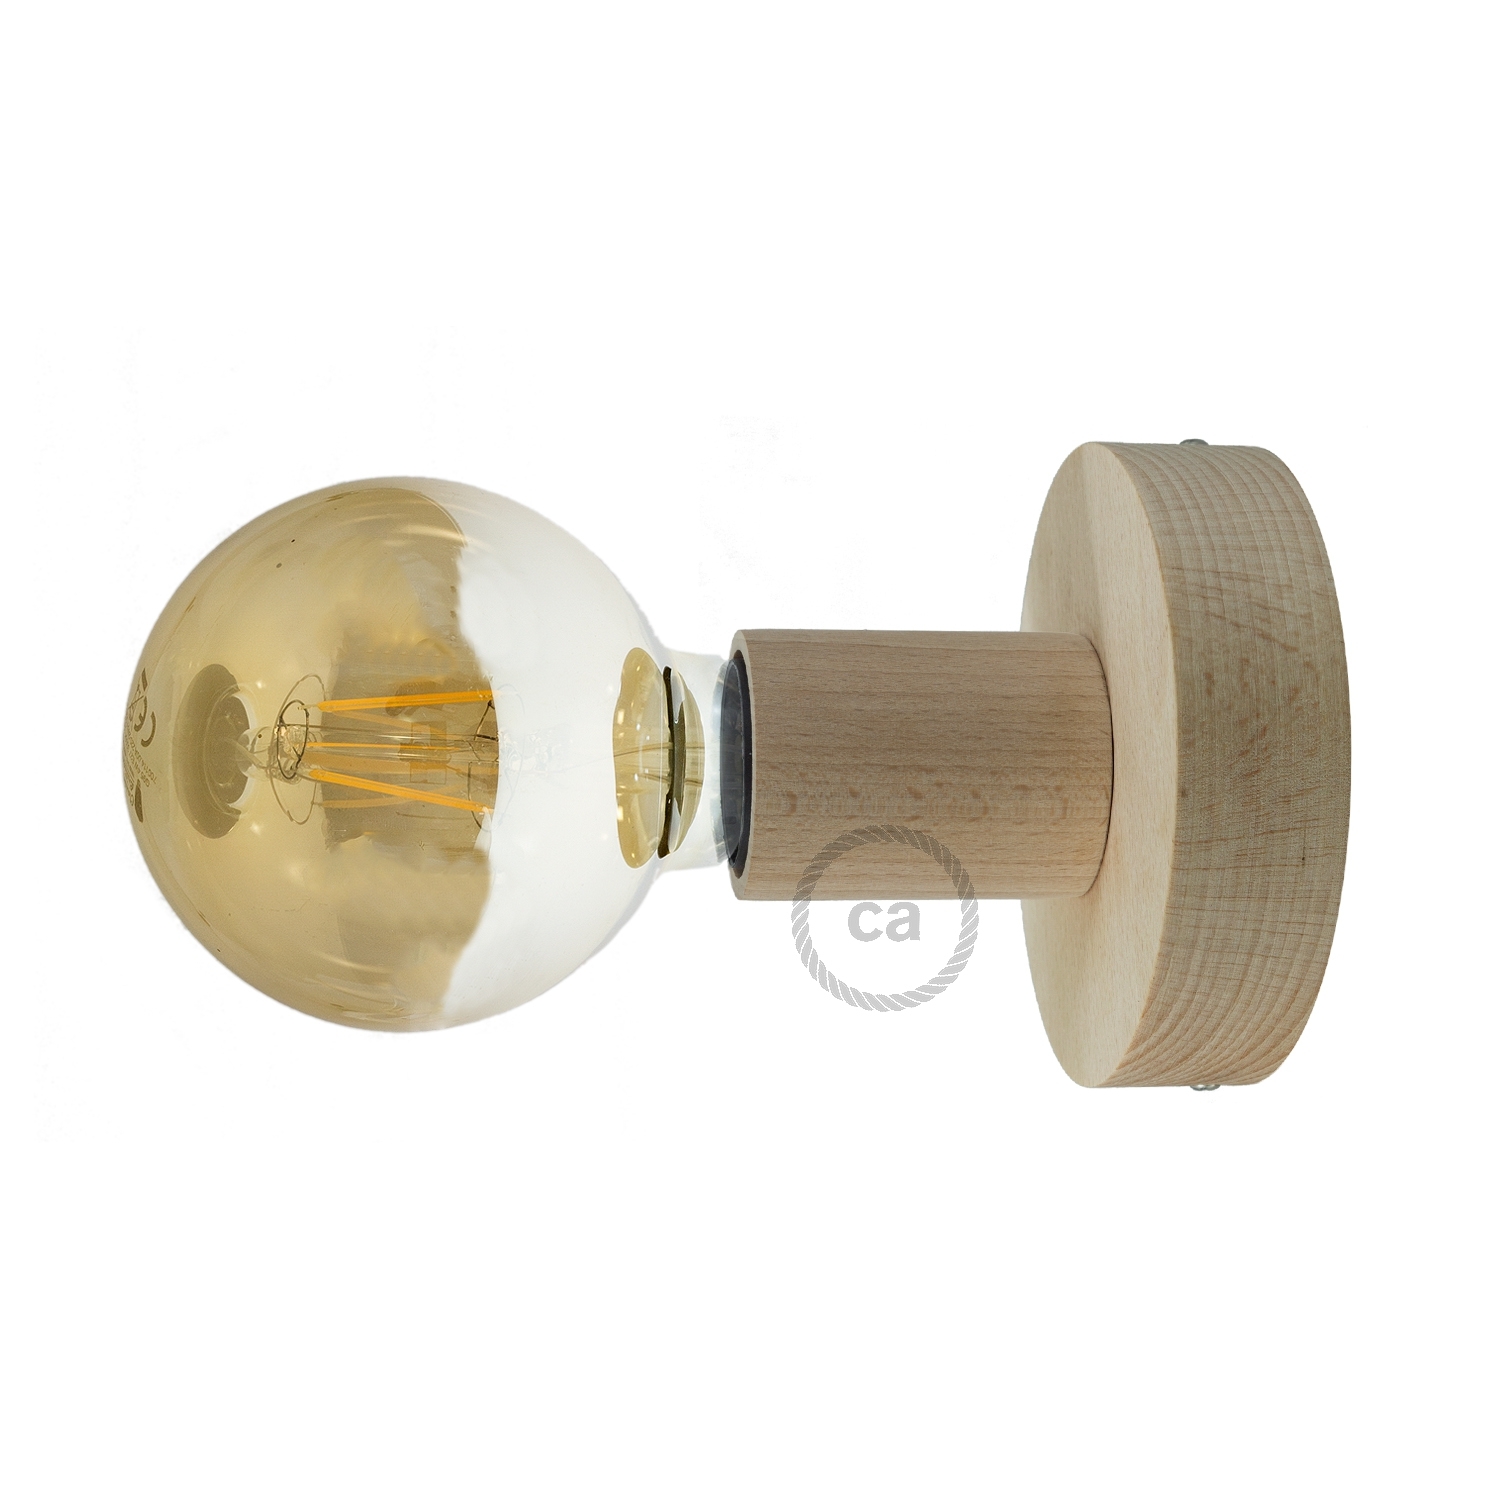 Natural Fermaluce, the natural wood flush light for your wall or ceiling, 3.8".